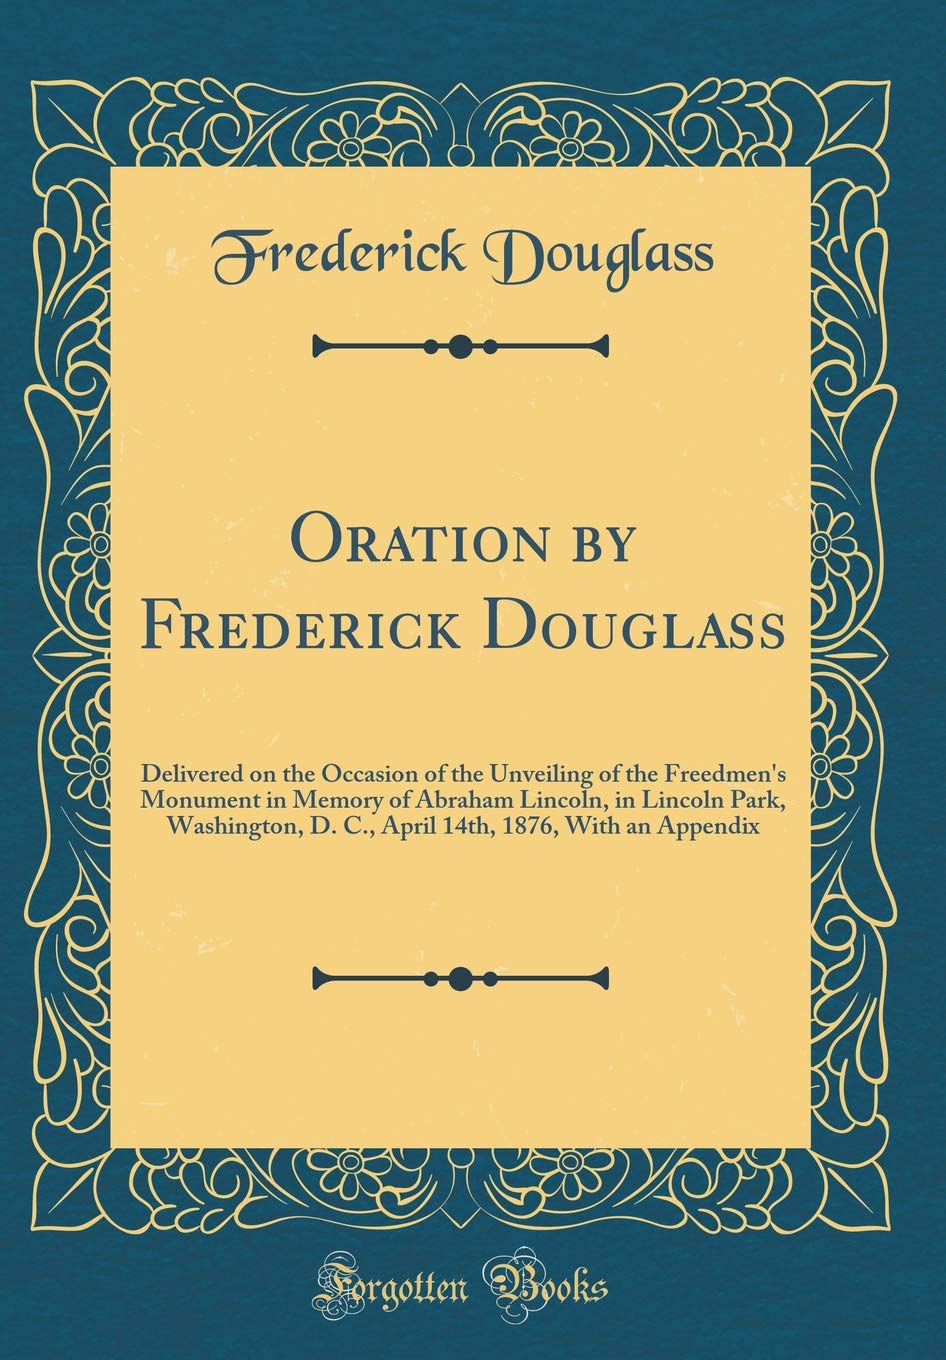 Oration by Frederick Douglass, Delivered on the Occasion of the Unveiling of the Freedmen's Monument in Memory of Abraham Lincoln, in Lincoln Park, Washington, D. C. , April 14th, 1876. with an Appendix